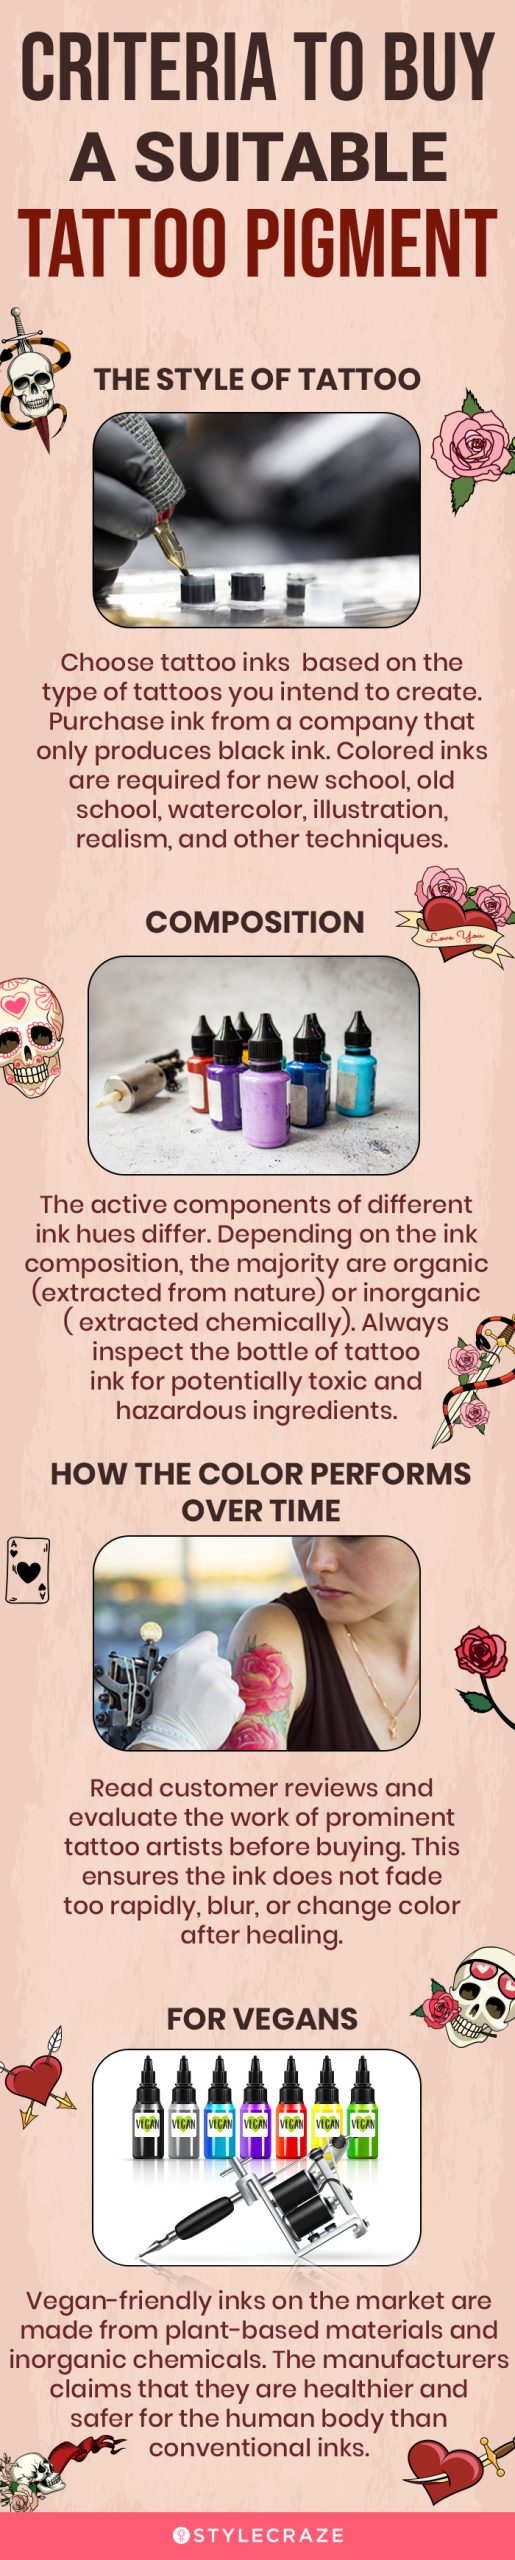 Criteria To Buy A Suitable Tattoo Pigment (infographic)